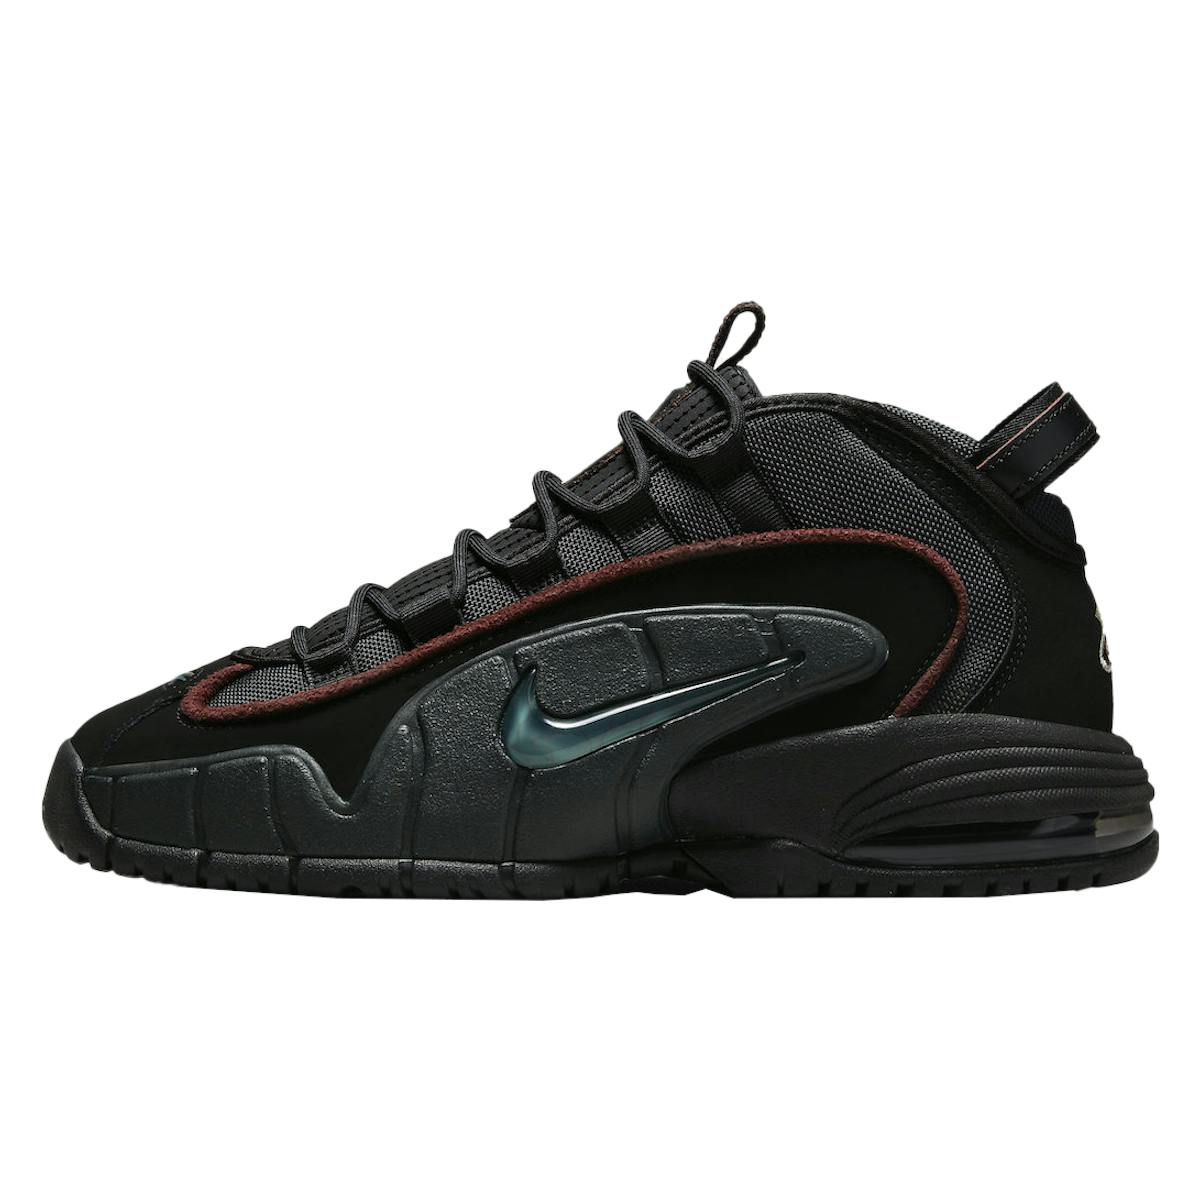 Nike Air Max Penny 1 "Faded Spruce"